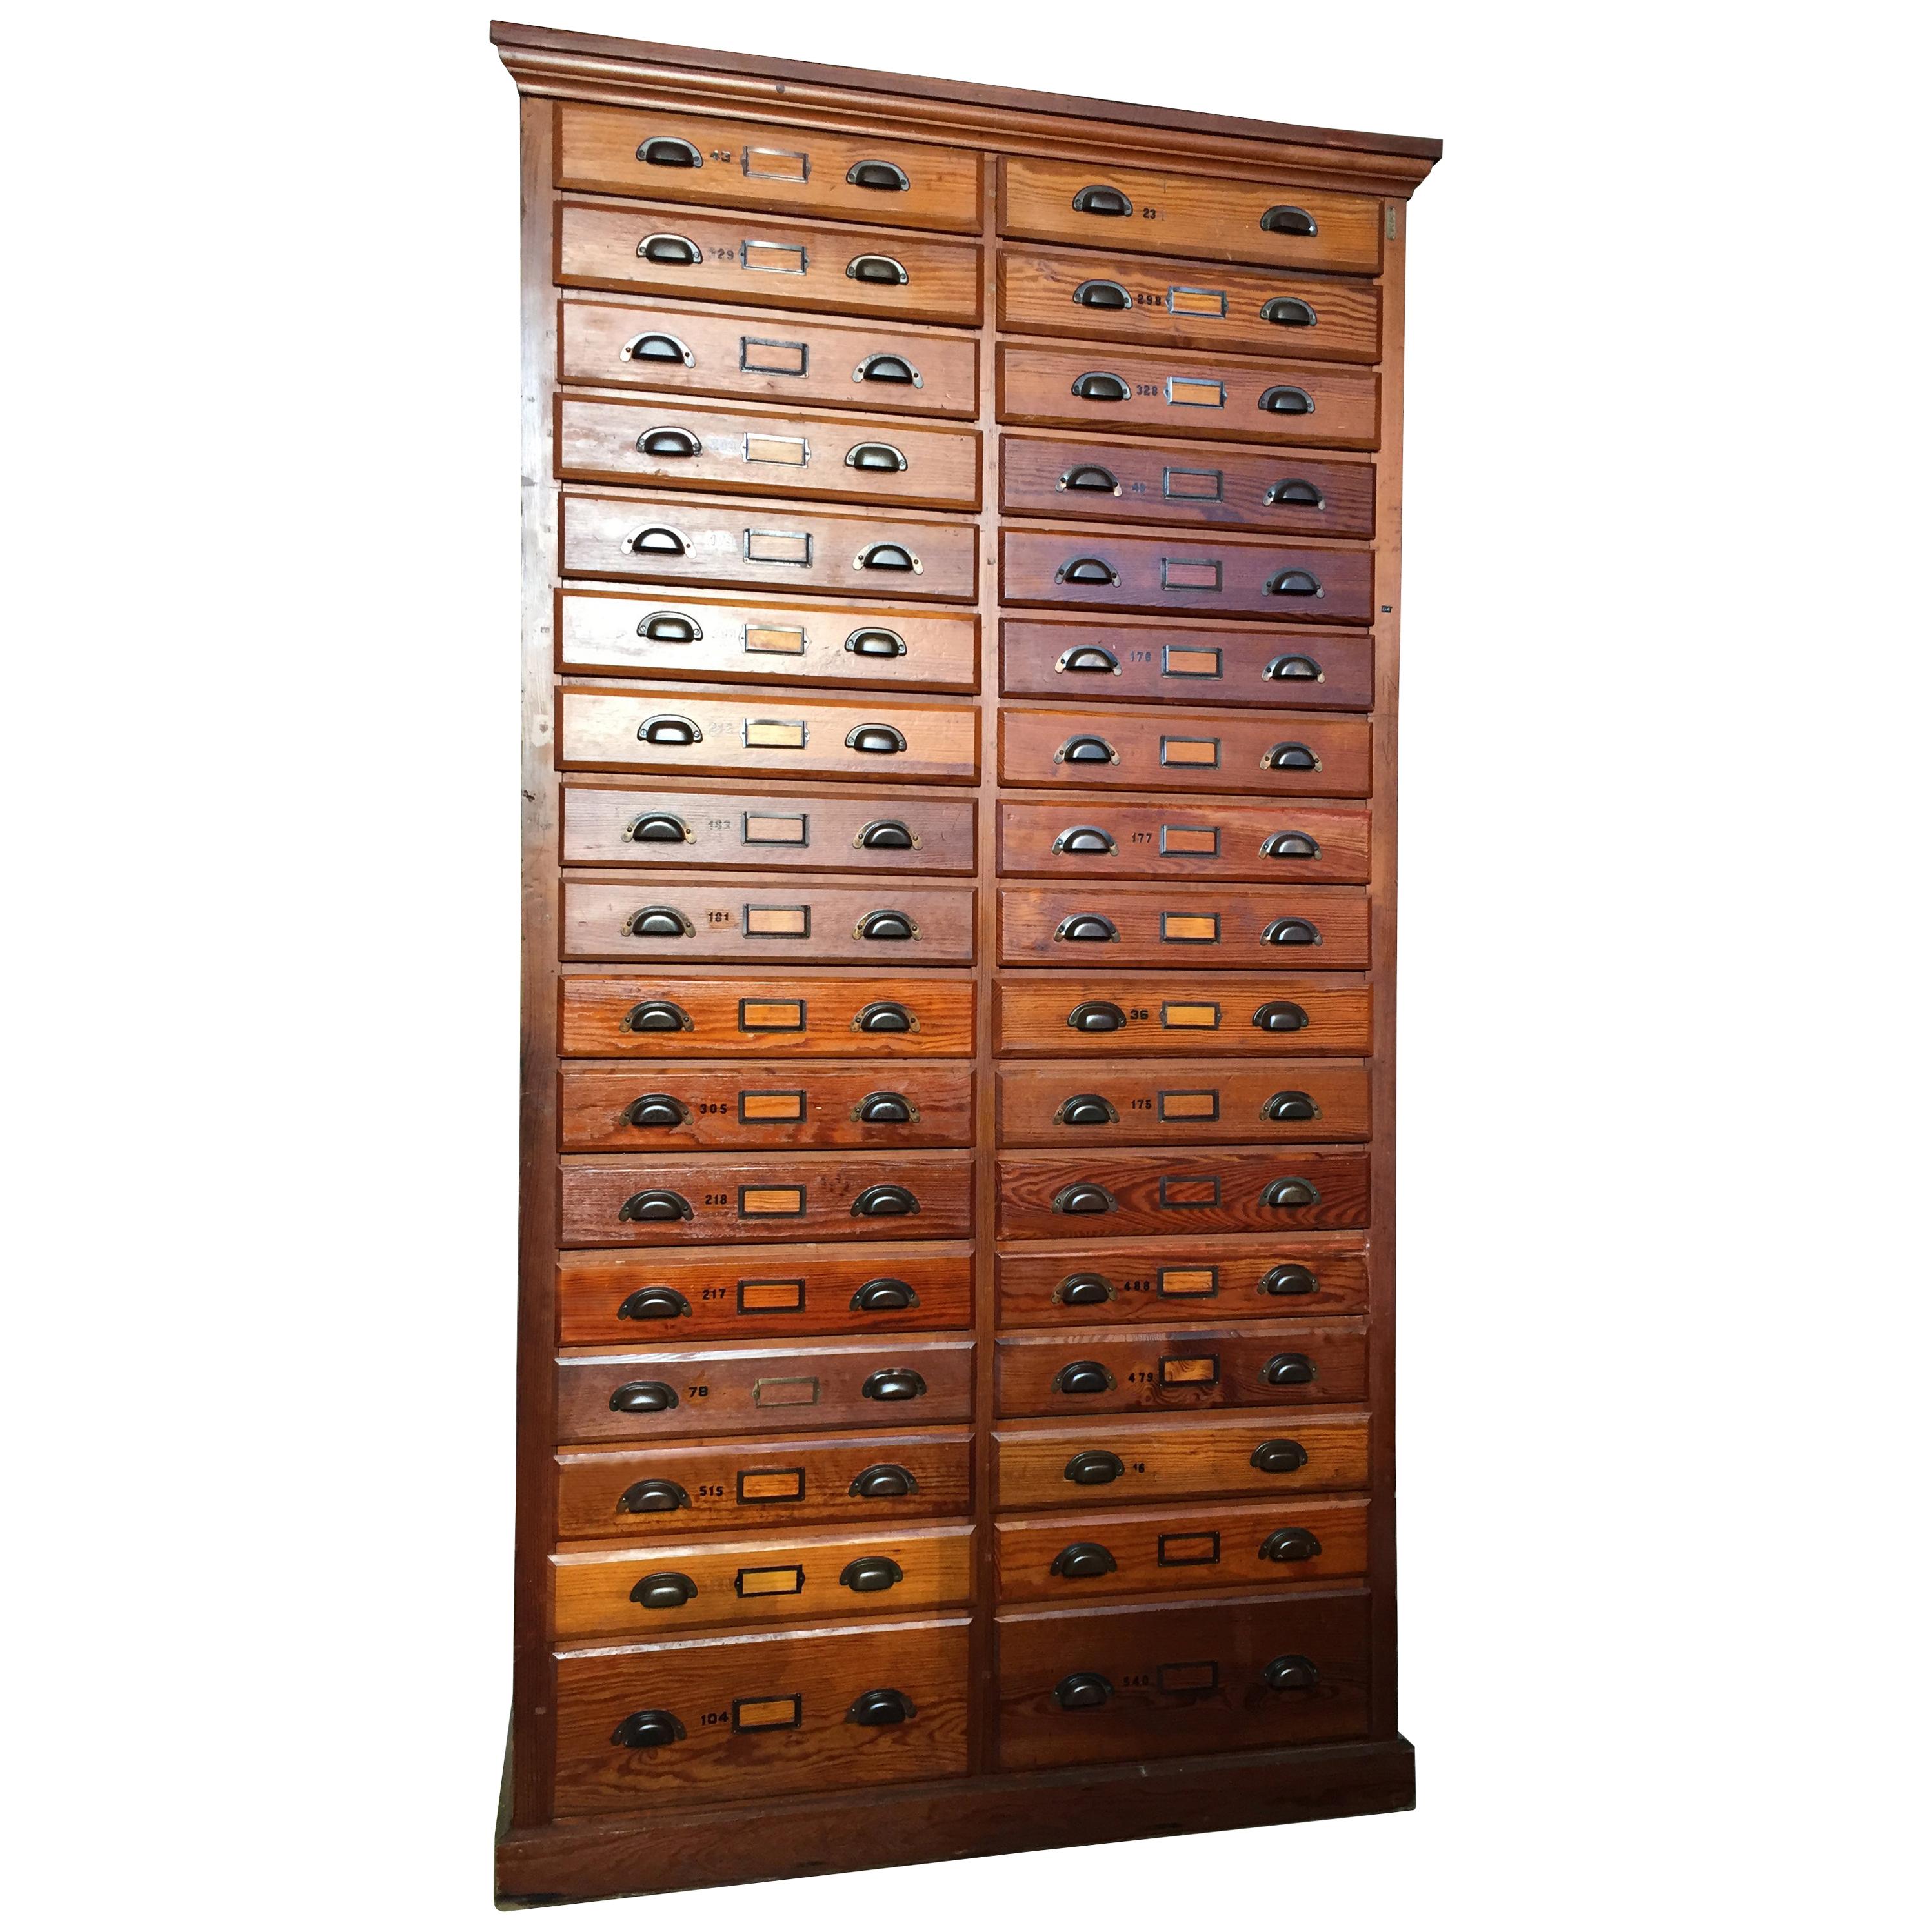 8FT antique printer's flat file cabinet 

Striking 1930s-1940s industrial cabinet featuring 34 drawers. 

Rich warm wood with shell metal pulls.

Would be ideal for an artist or retail space.

Measures: 92.5